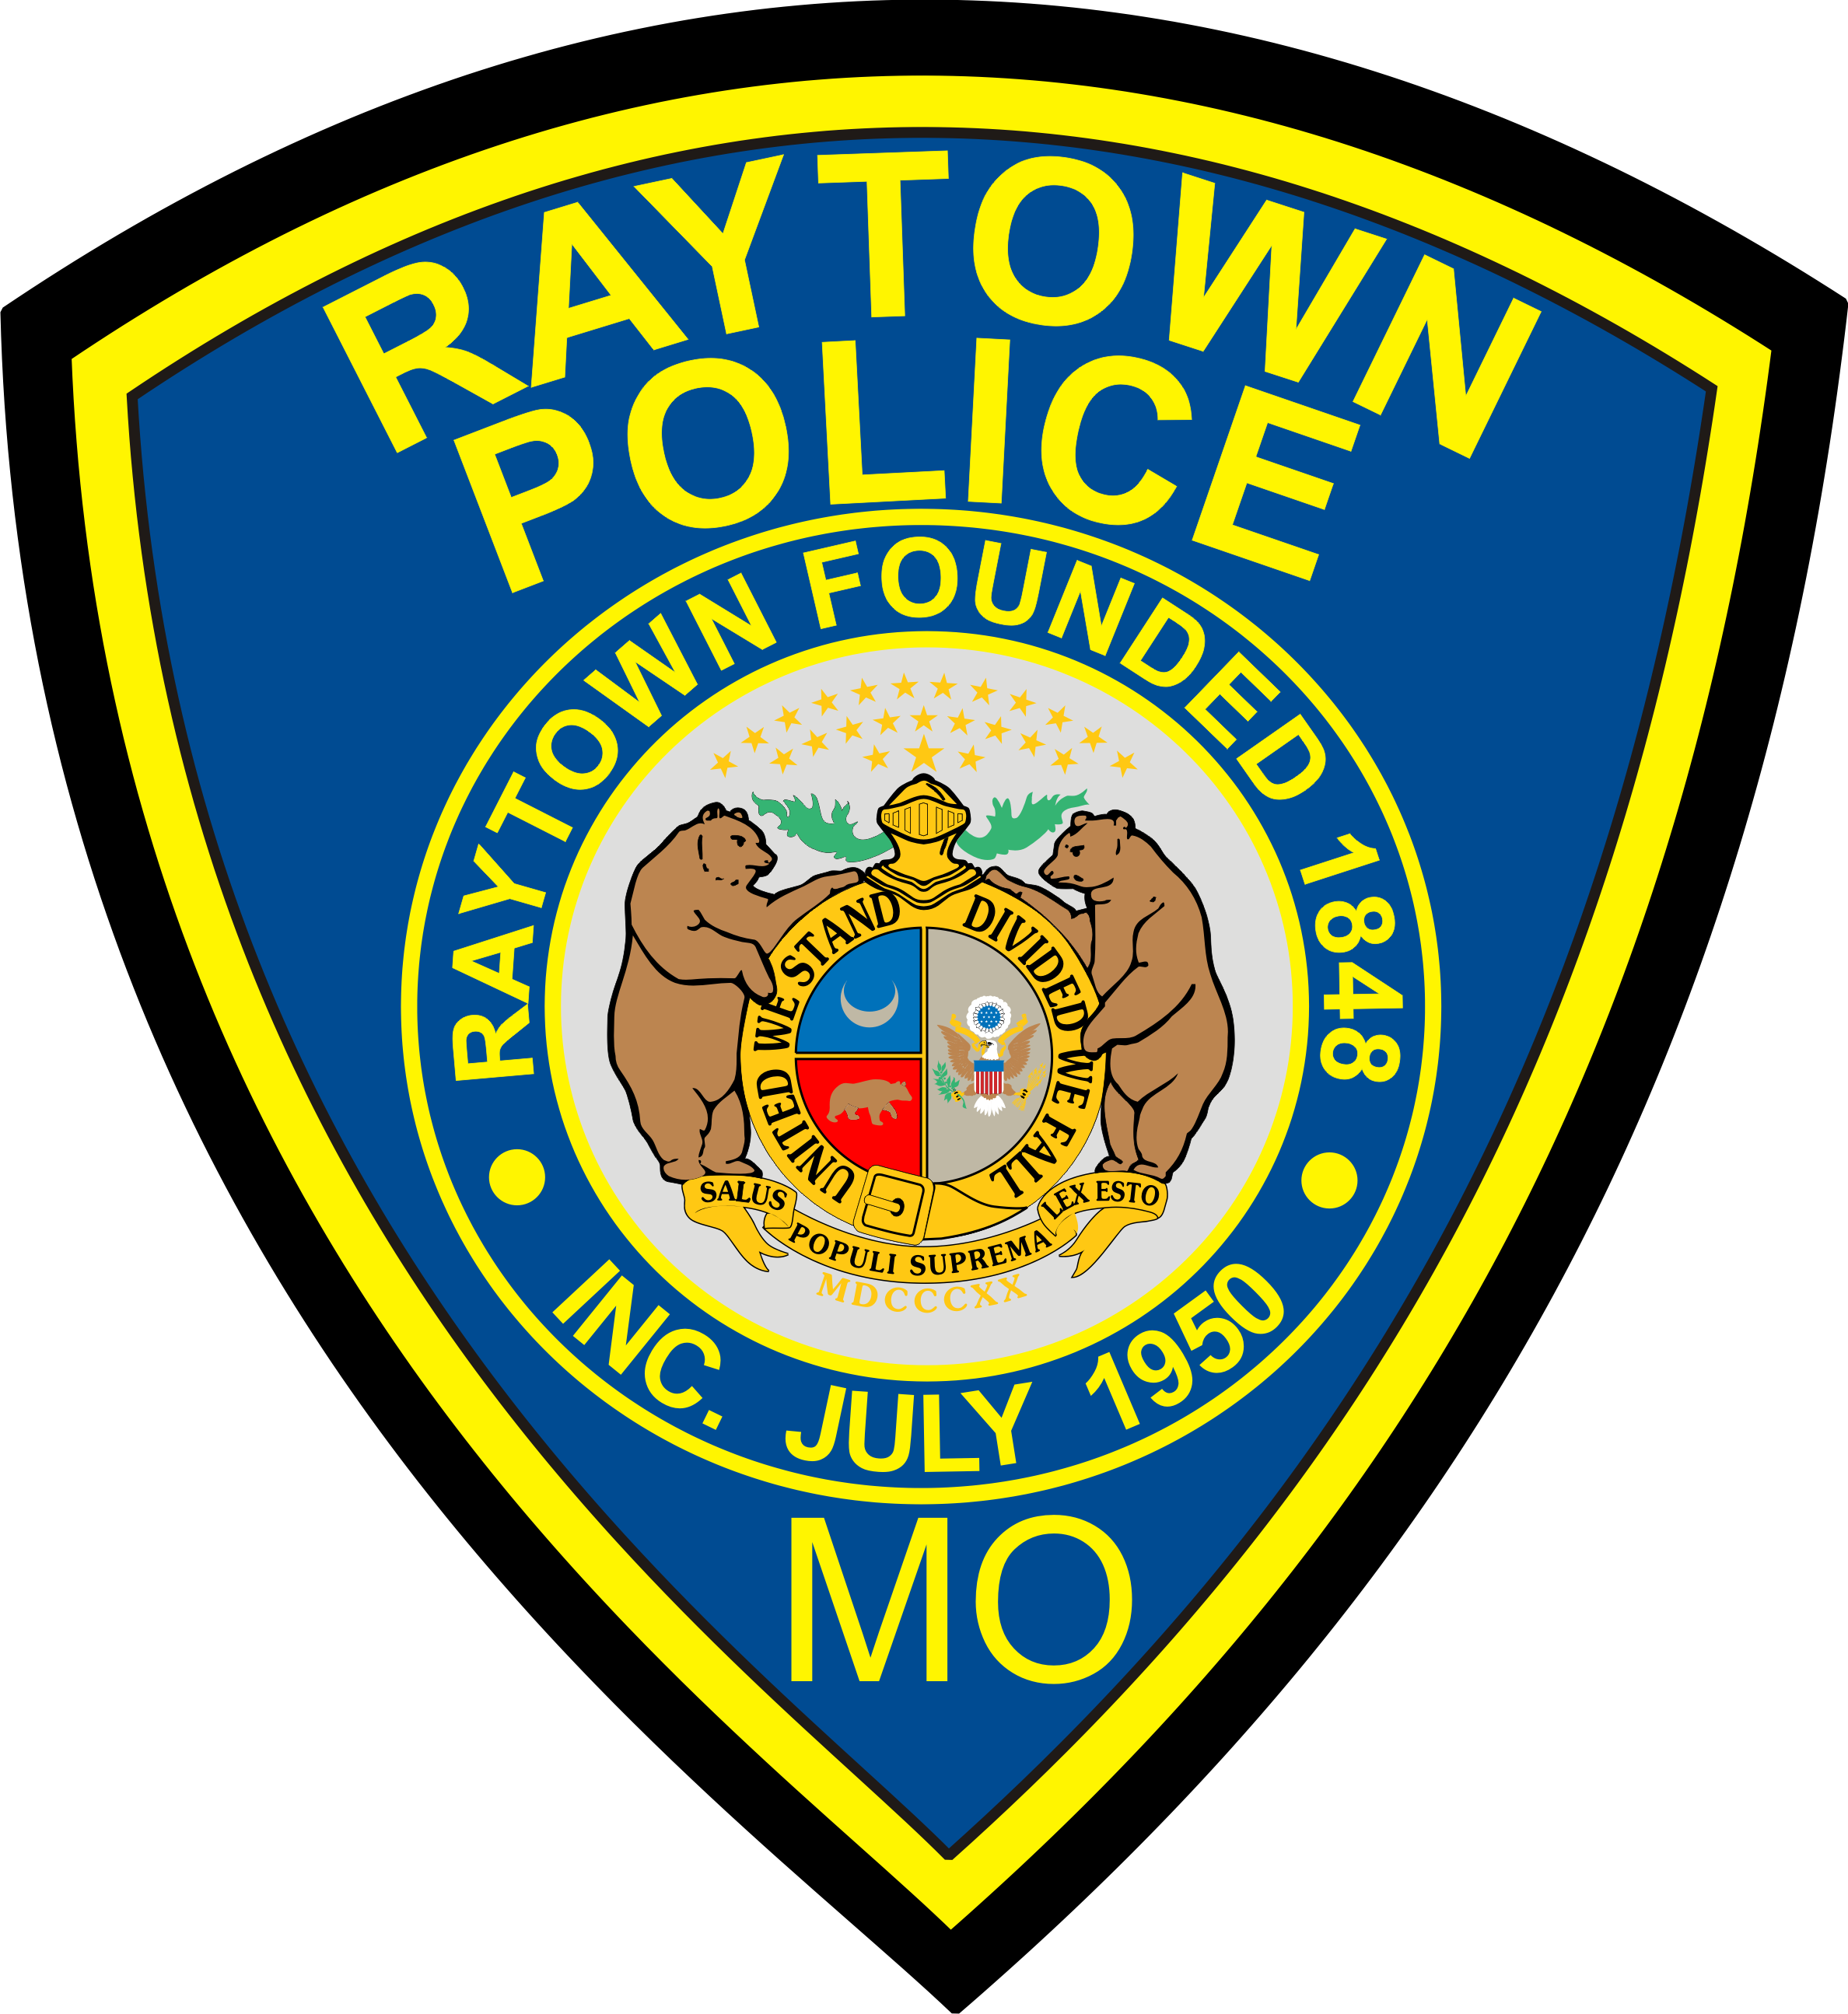 Raytown Police Looking for Graphic Designer to Design New Logo 